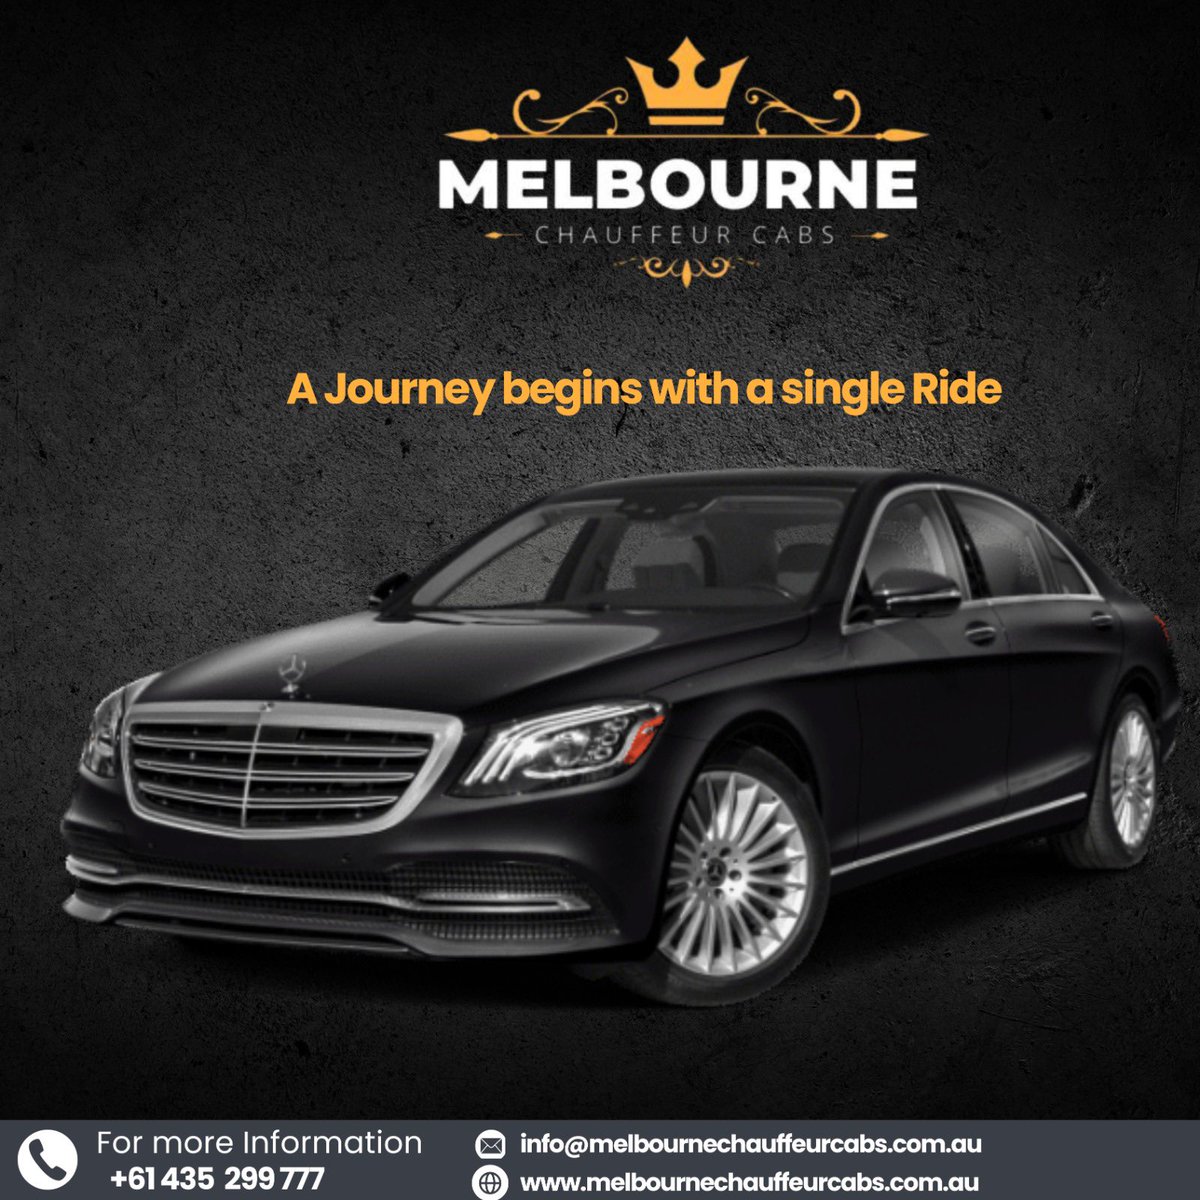 🚖 'Arrive in style, travel with class.' 🌟 Let Melbourne Chauffeur Cabs take you on a luxurious journey through Victoria. ✨ Book your ride today! 📞 Phone: +61 435 299 777 melbournechauffeurcabs.com.au 📍 Service locations: Melbourne, Geelong, Ballarat, Bendigo, Mornington